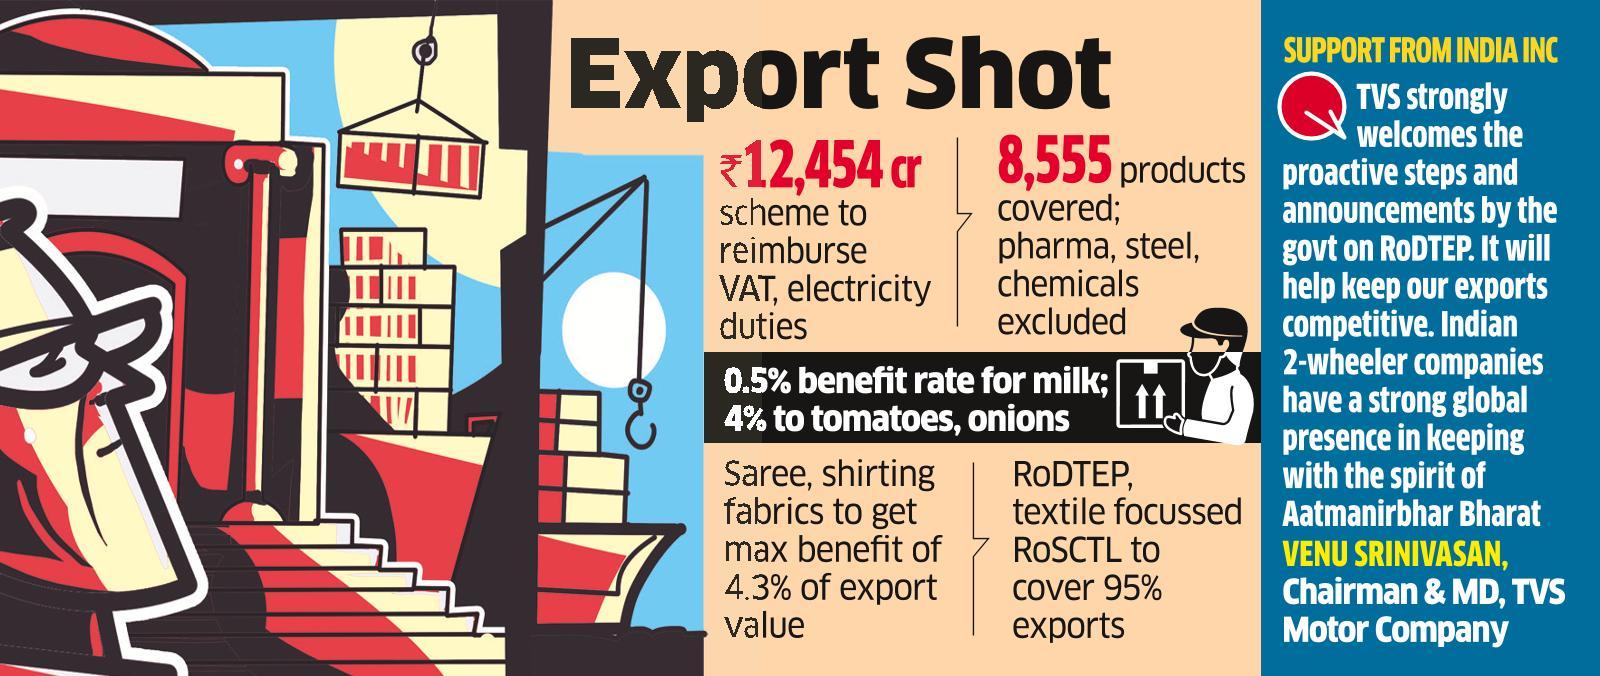 rodtep-scheme-rodtep-india-notifies-duty-rebate-rates-to-give-exports